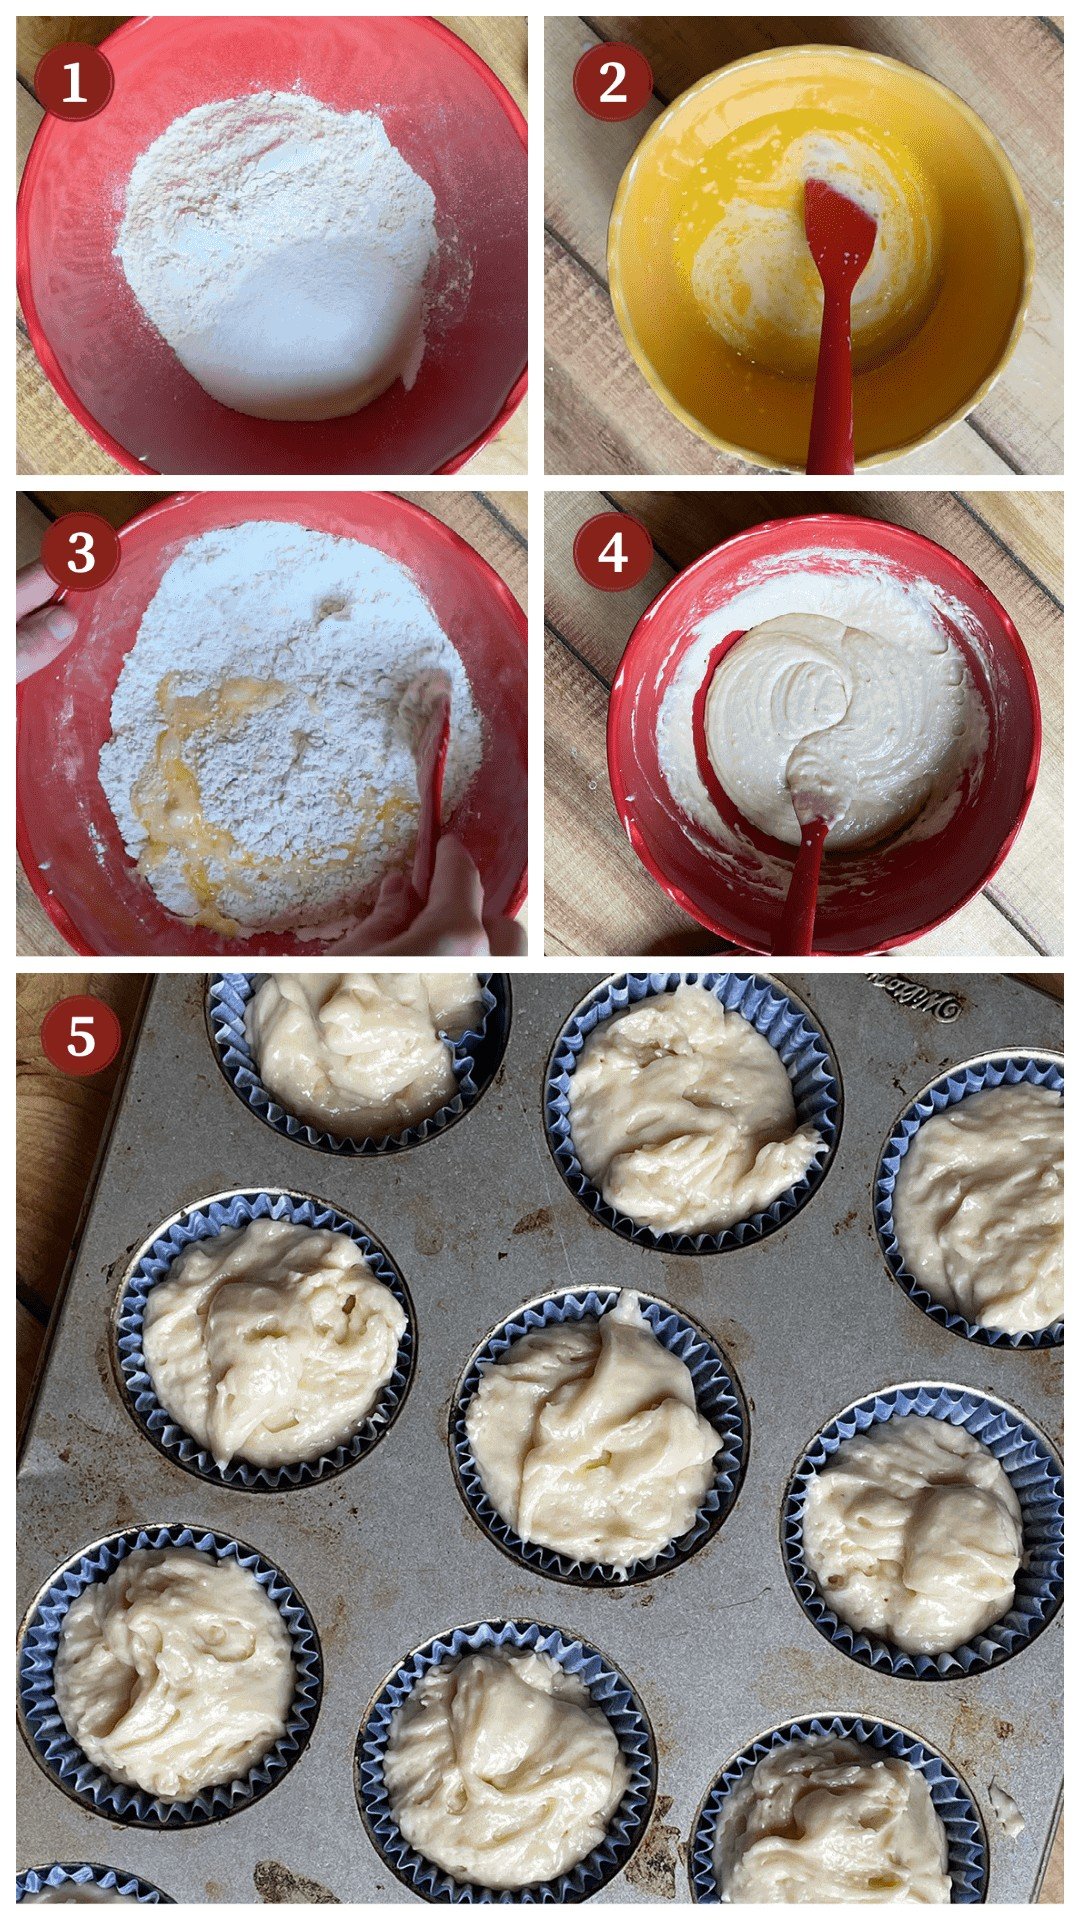 A collage of images showing the process of making buttermilk images, steps 1 - 5.